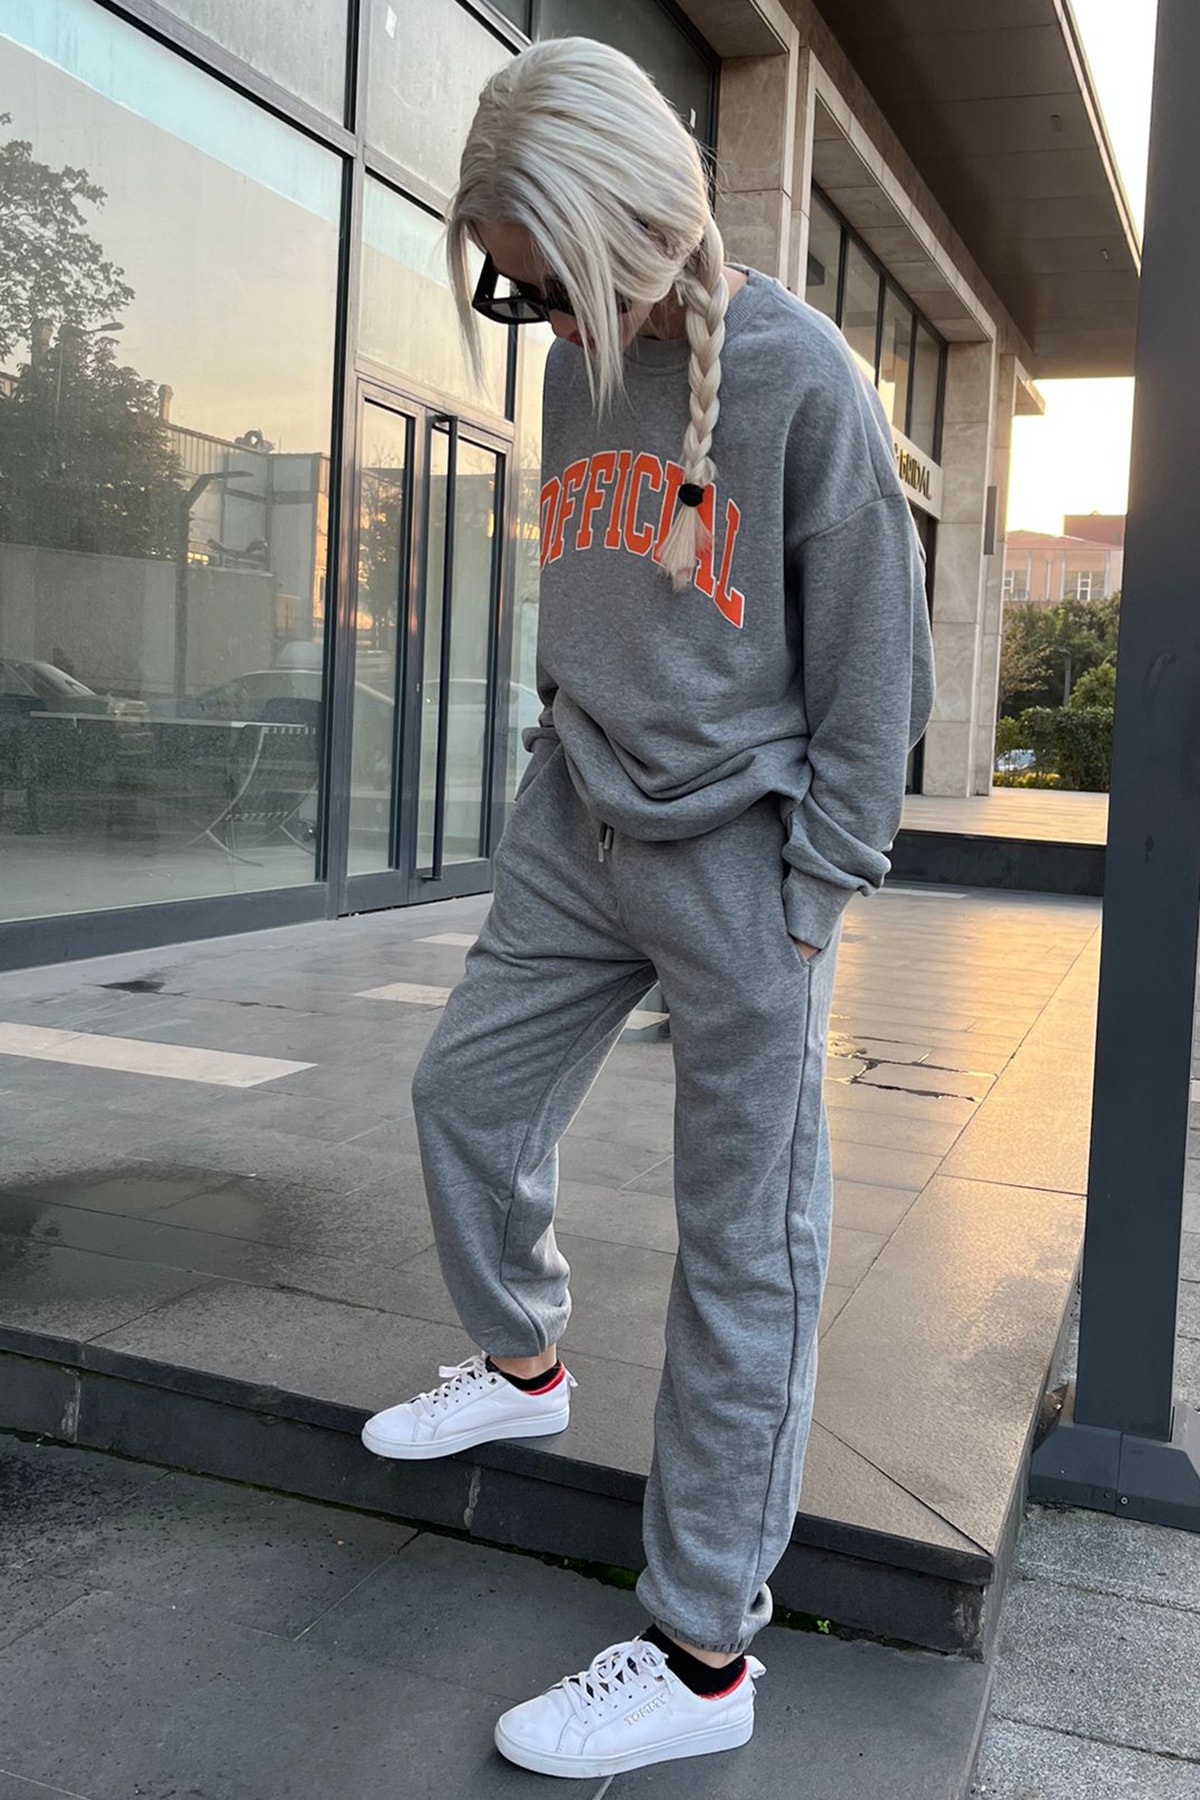 Madmext Mad Girls Gray Tracksuit Suit Mg944